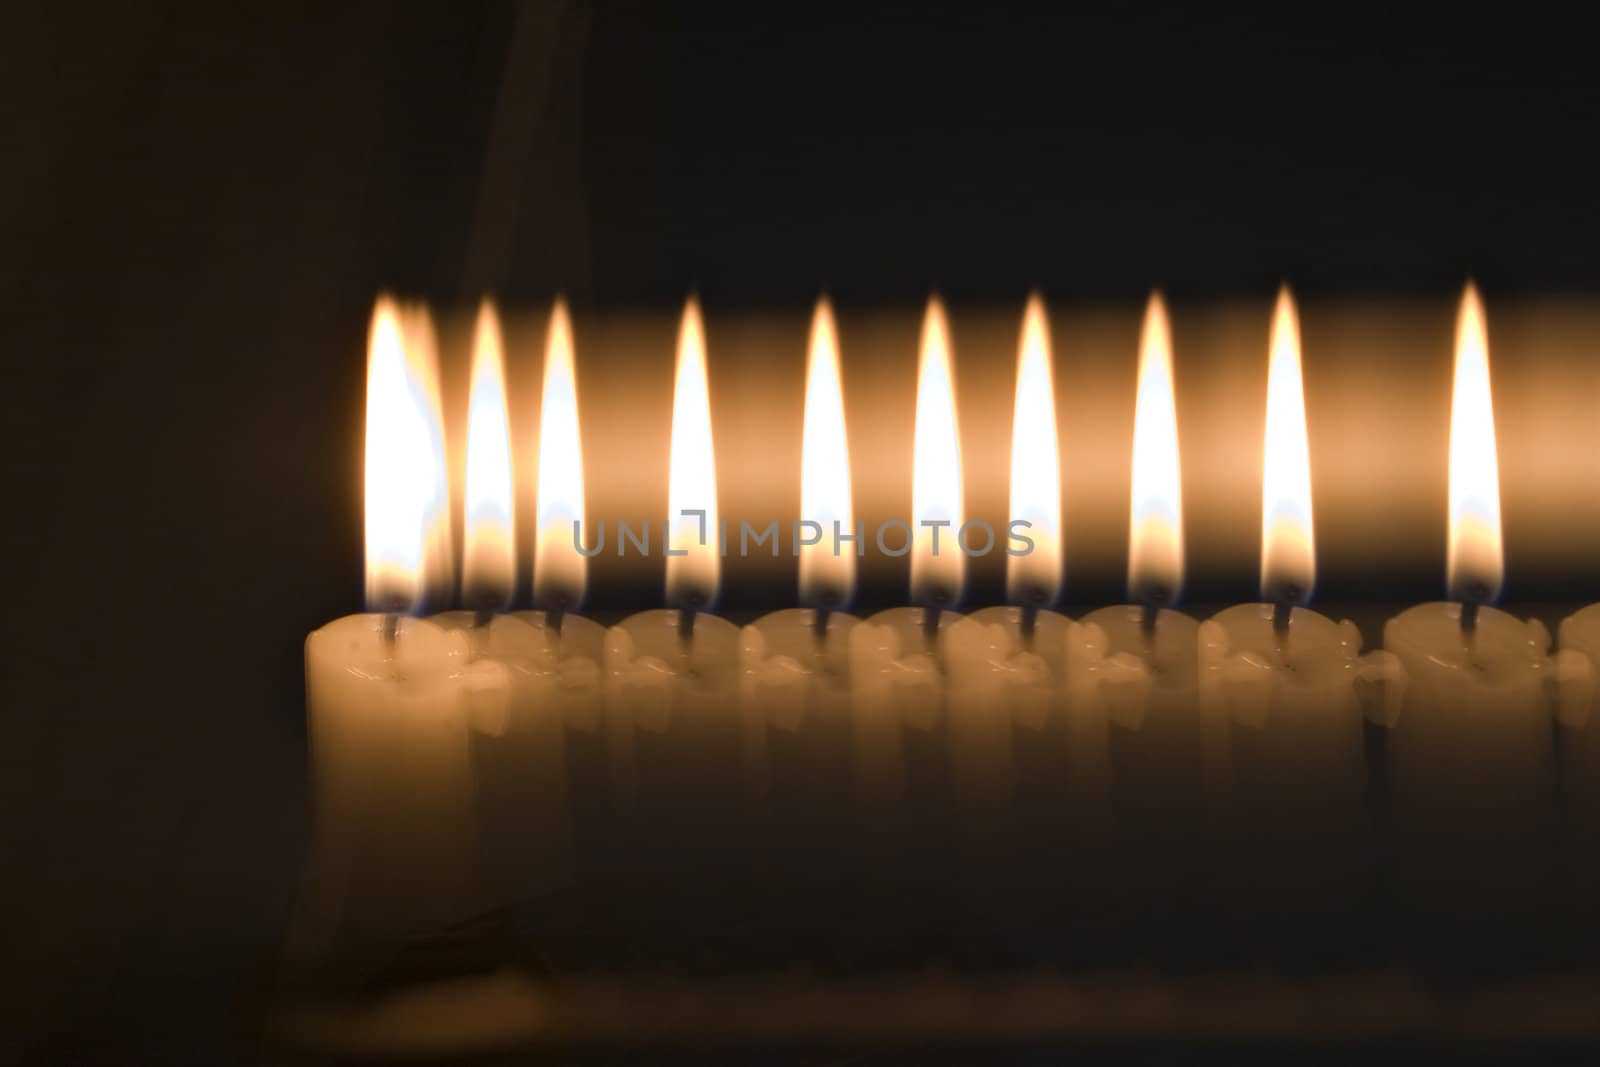 Multiple exposures of a candle flame